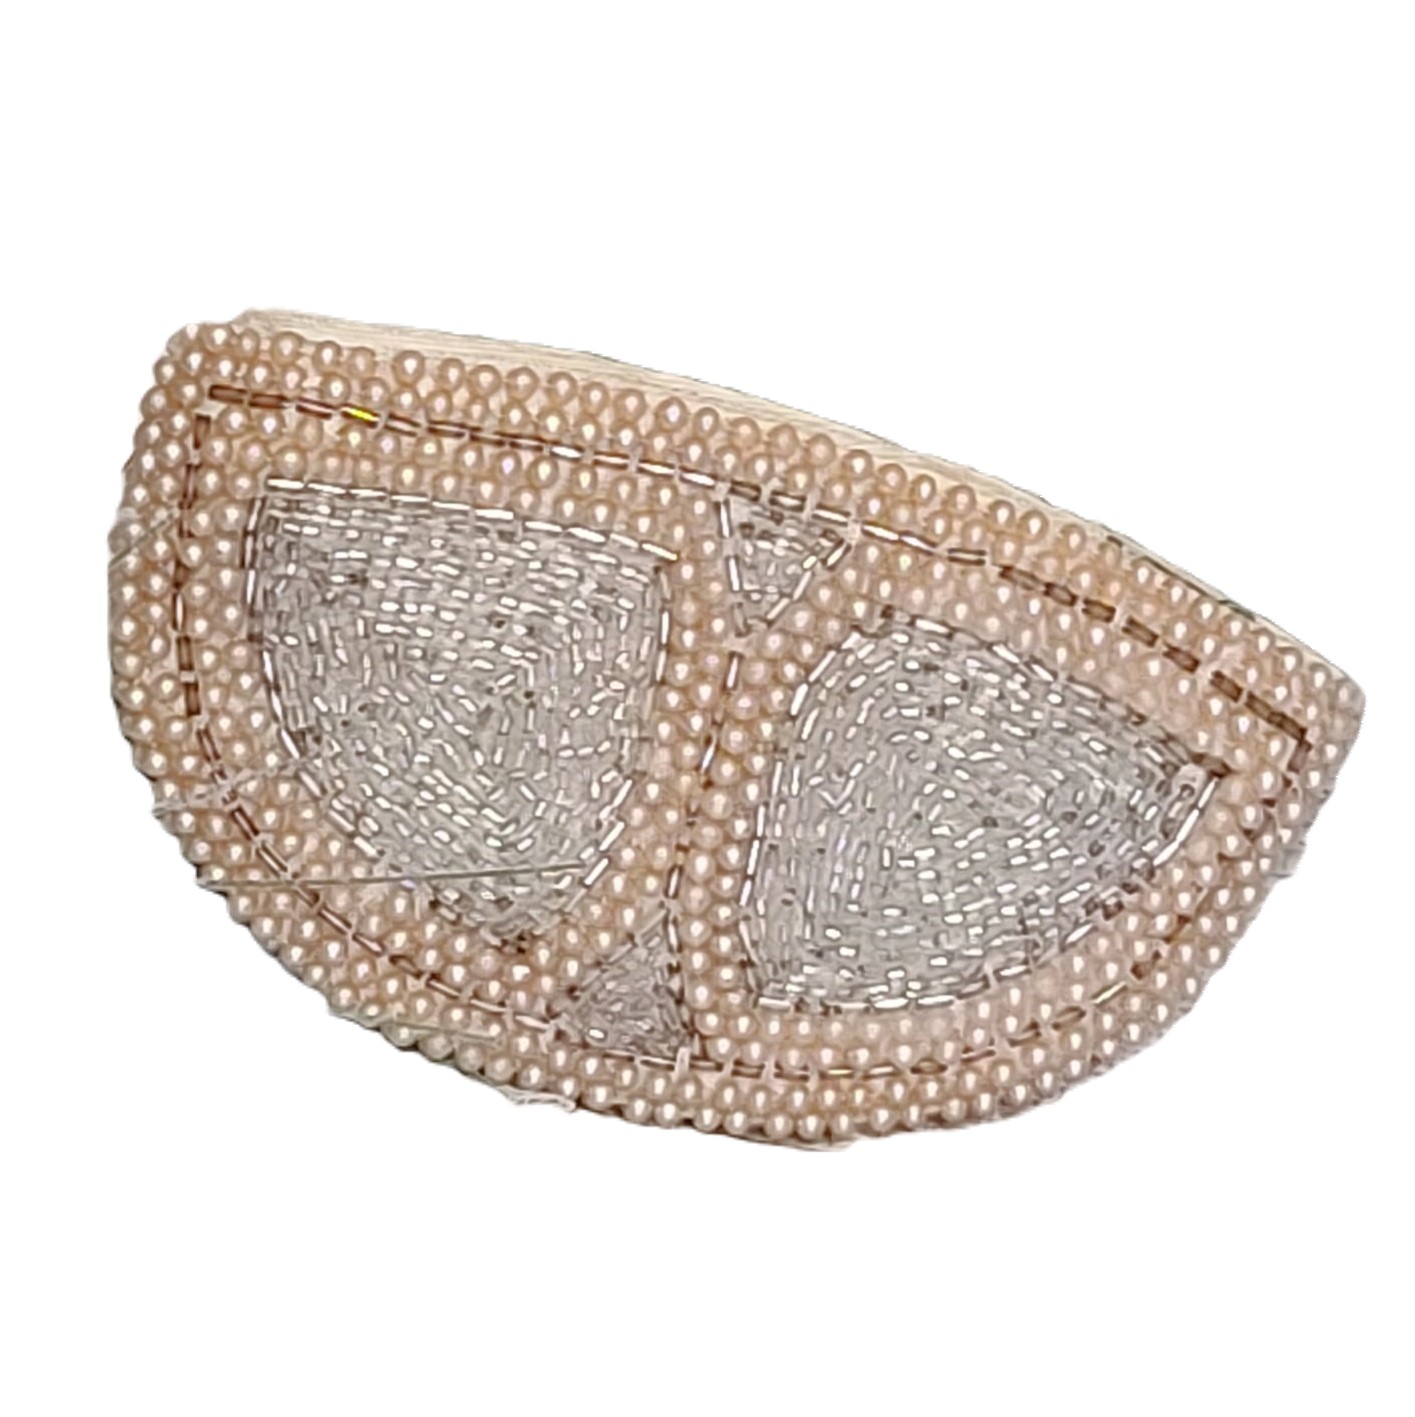 vintage beads and pearls half moon evening coin purse - Click Image to Close